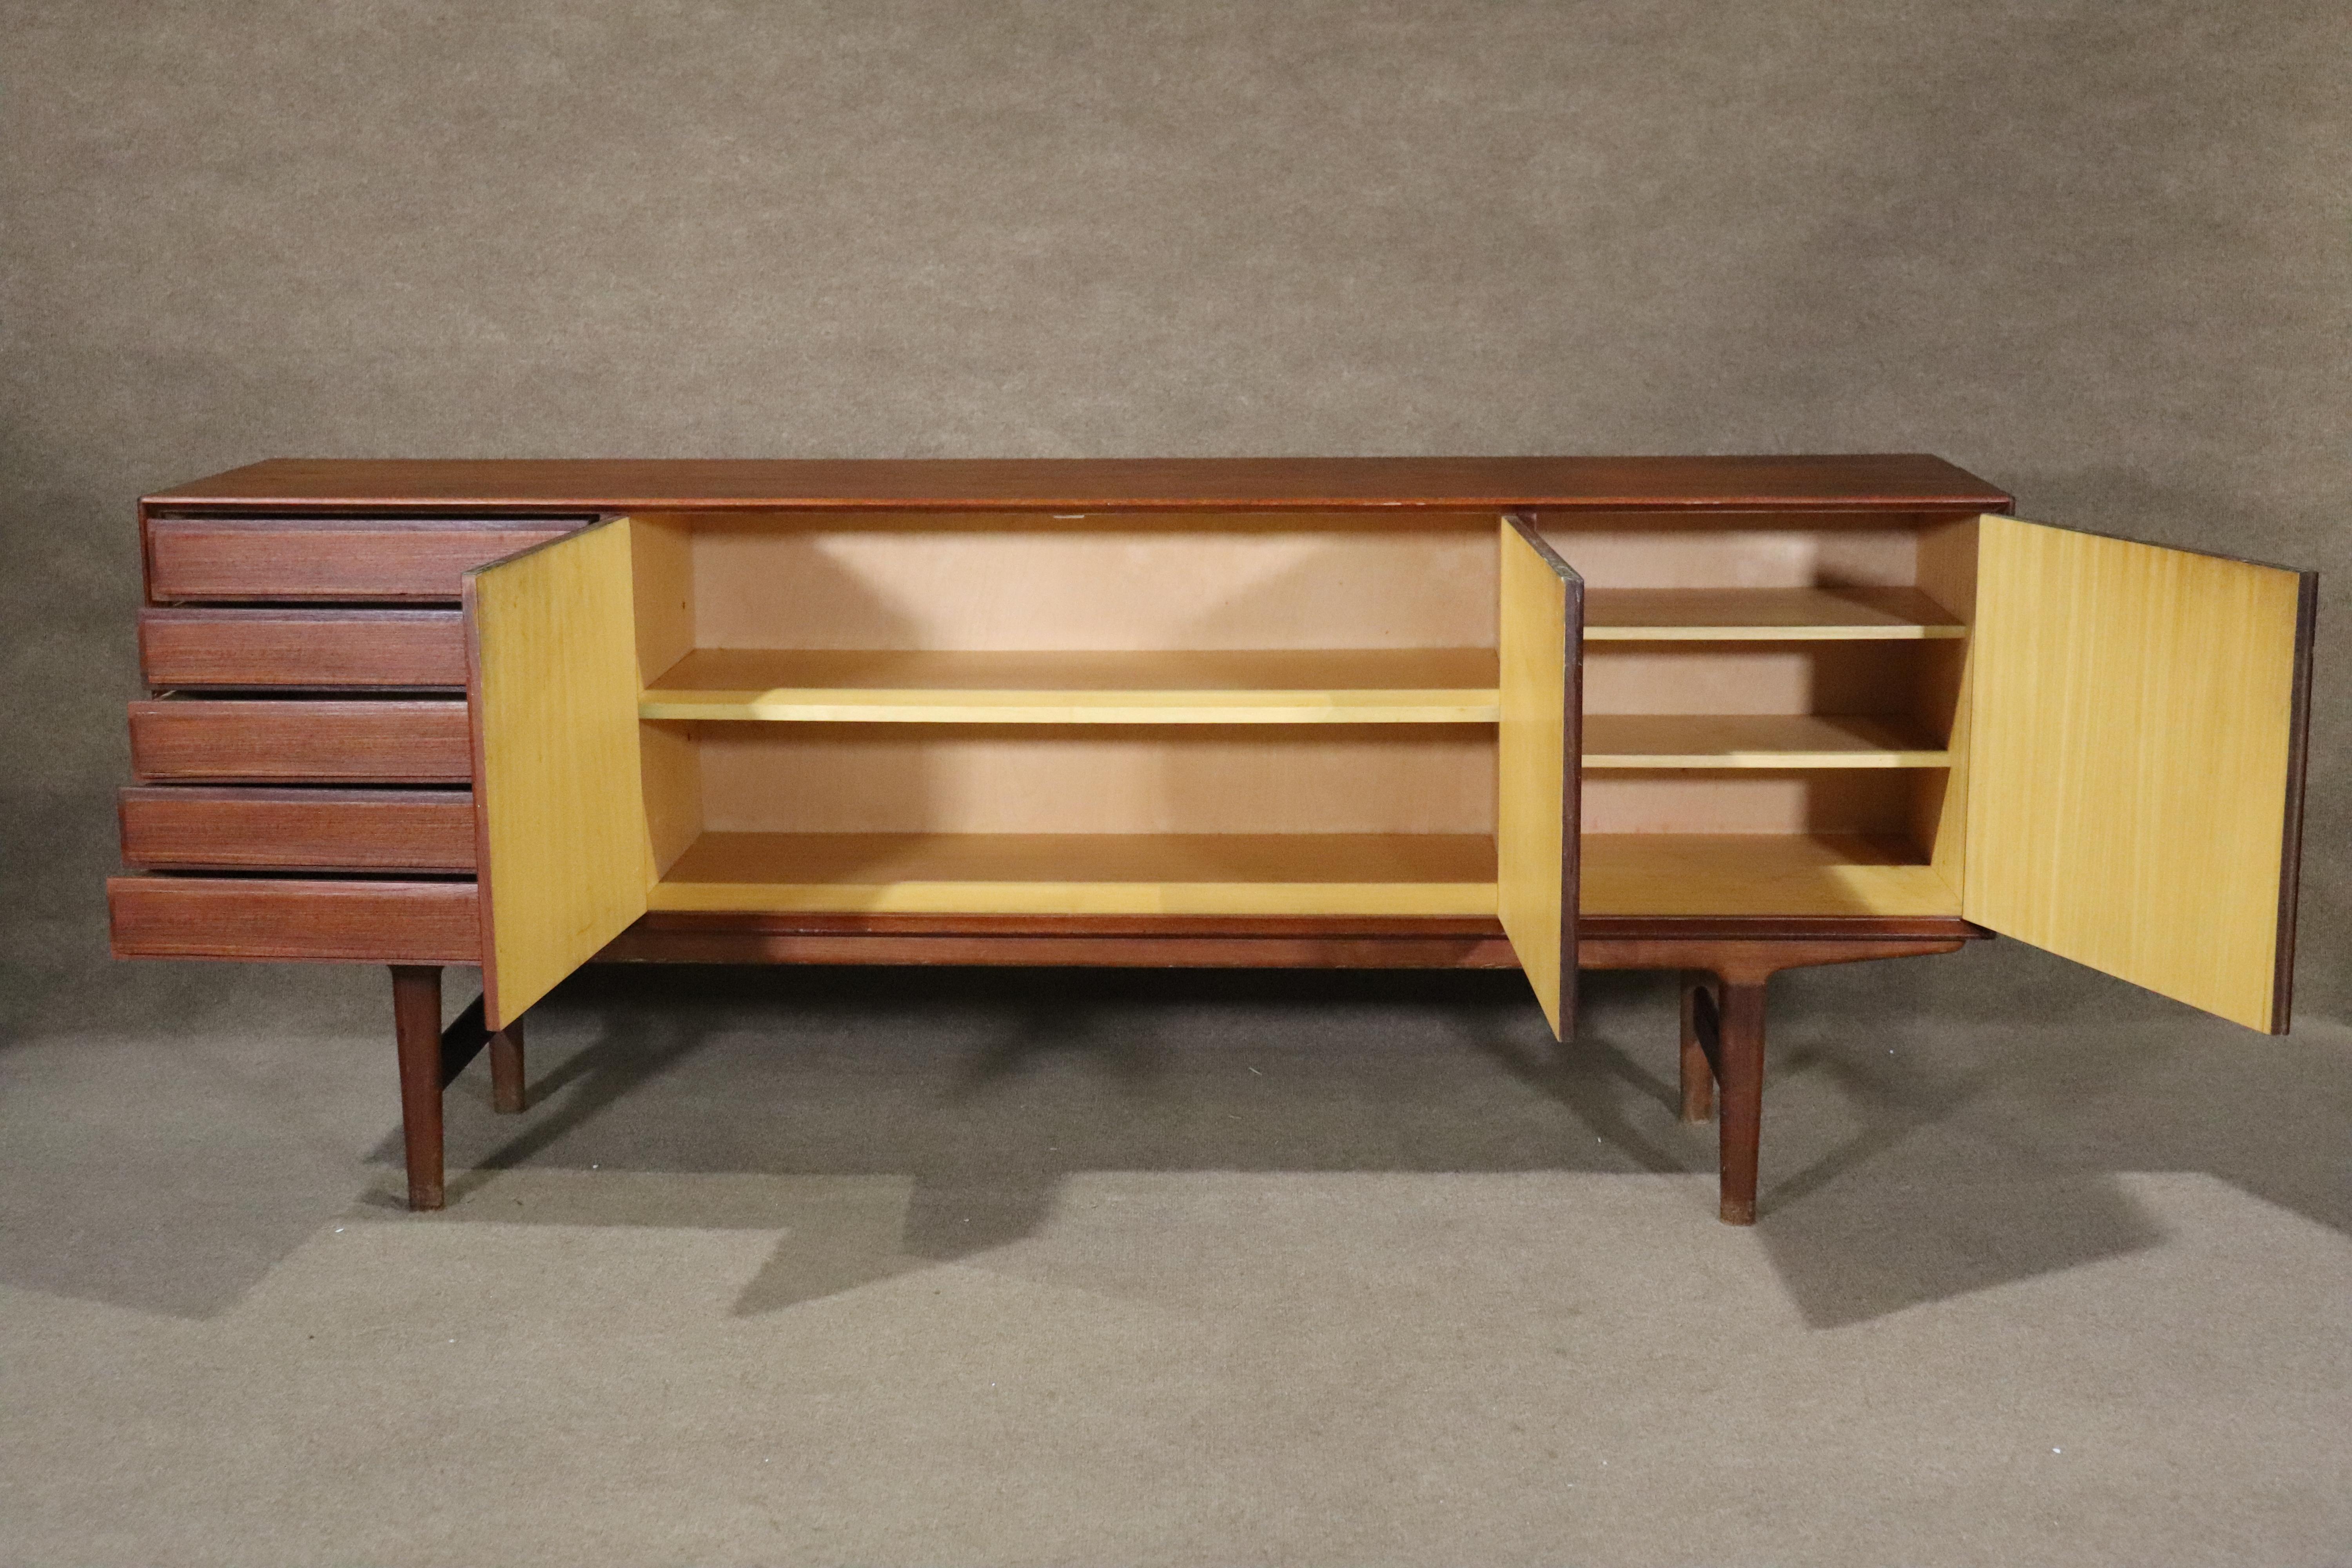 Long 6+ foot Danish sideboard by Fredrik Kayser. Four drawers and three doors that open to two storage cabinets. Handsome Danish mid-century design.
Please confirm location NY or NJ